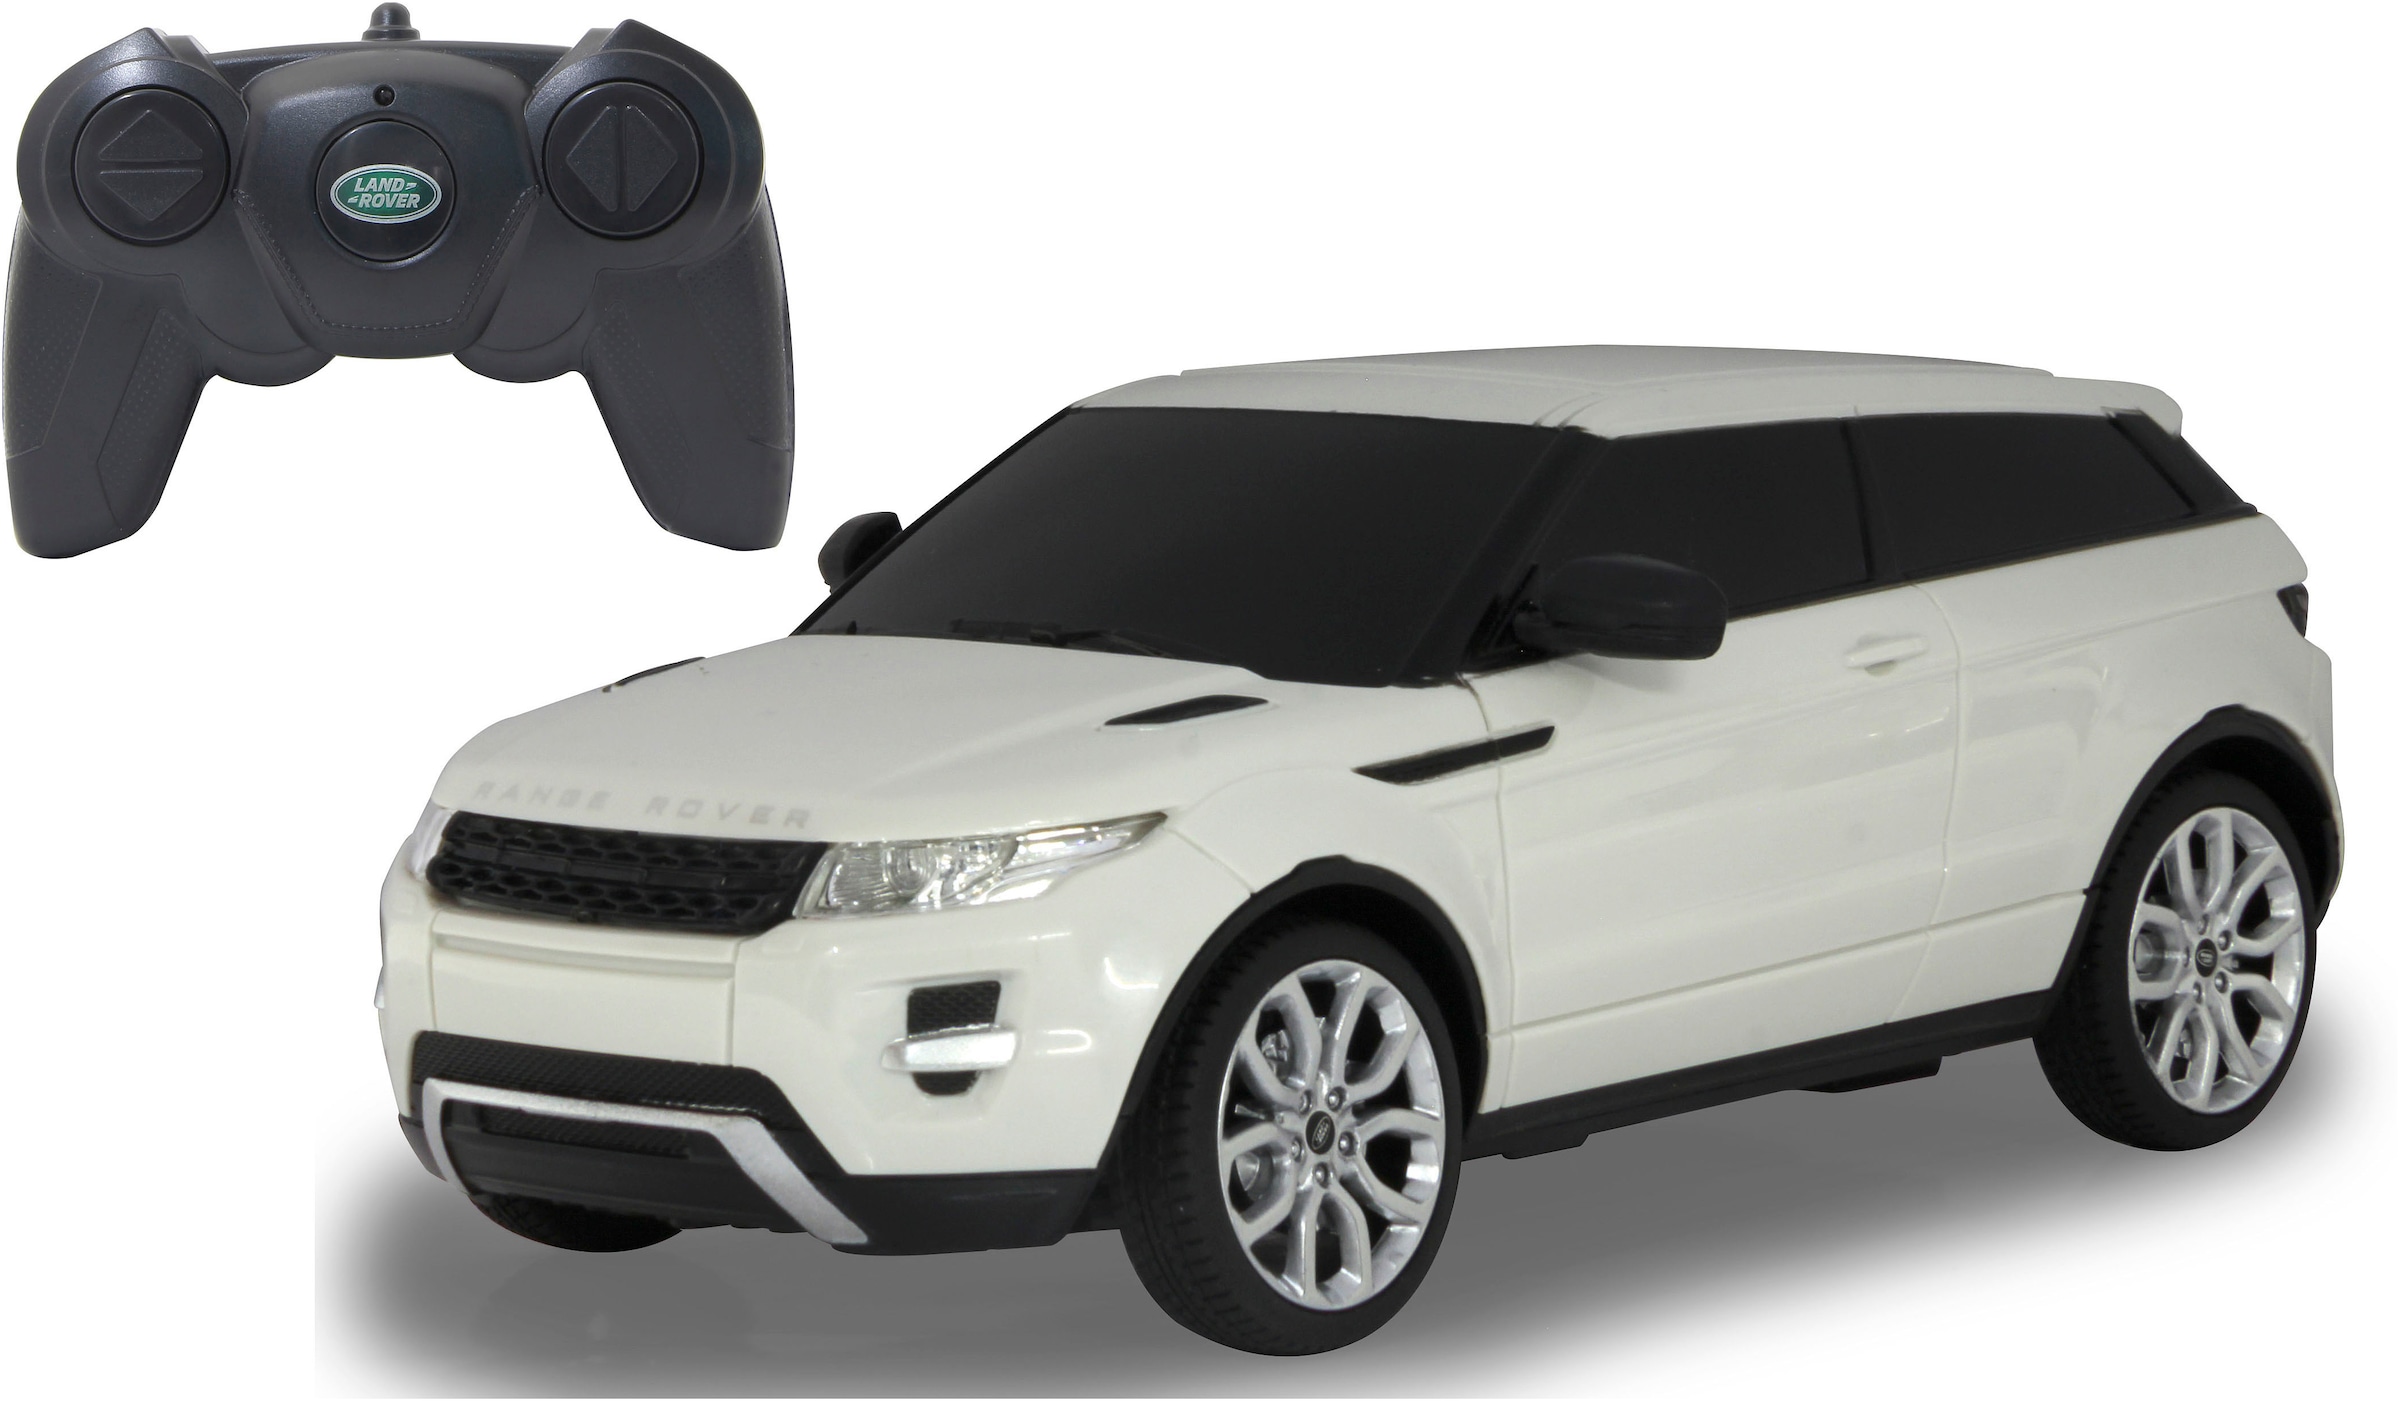 RC-Auto »Deluxe Cars, Range Rover Evoque, 1:24, weiss, 2,4GHz«